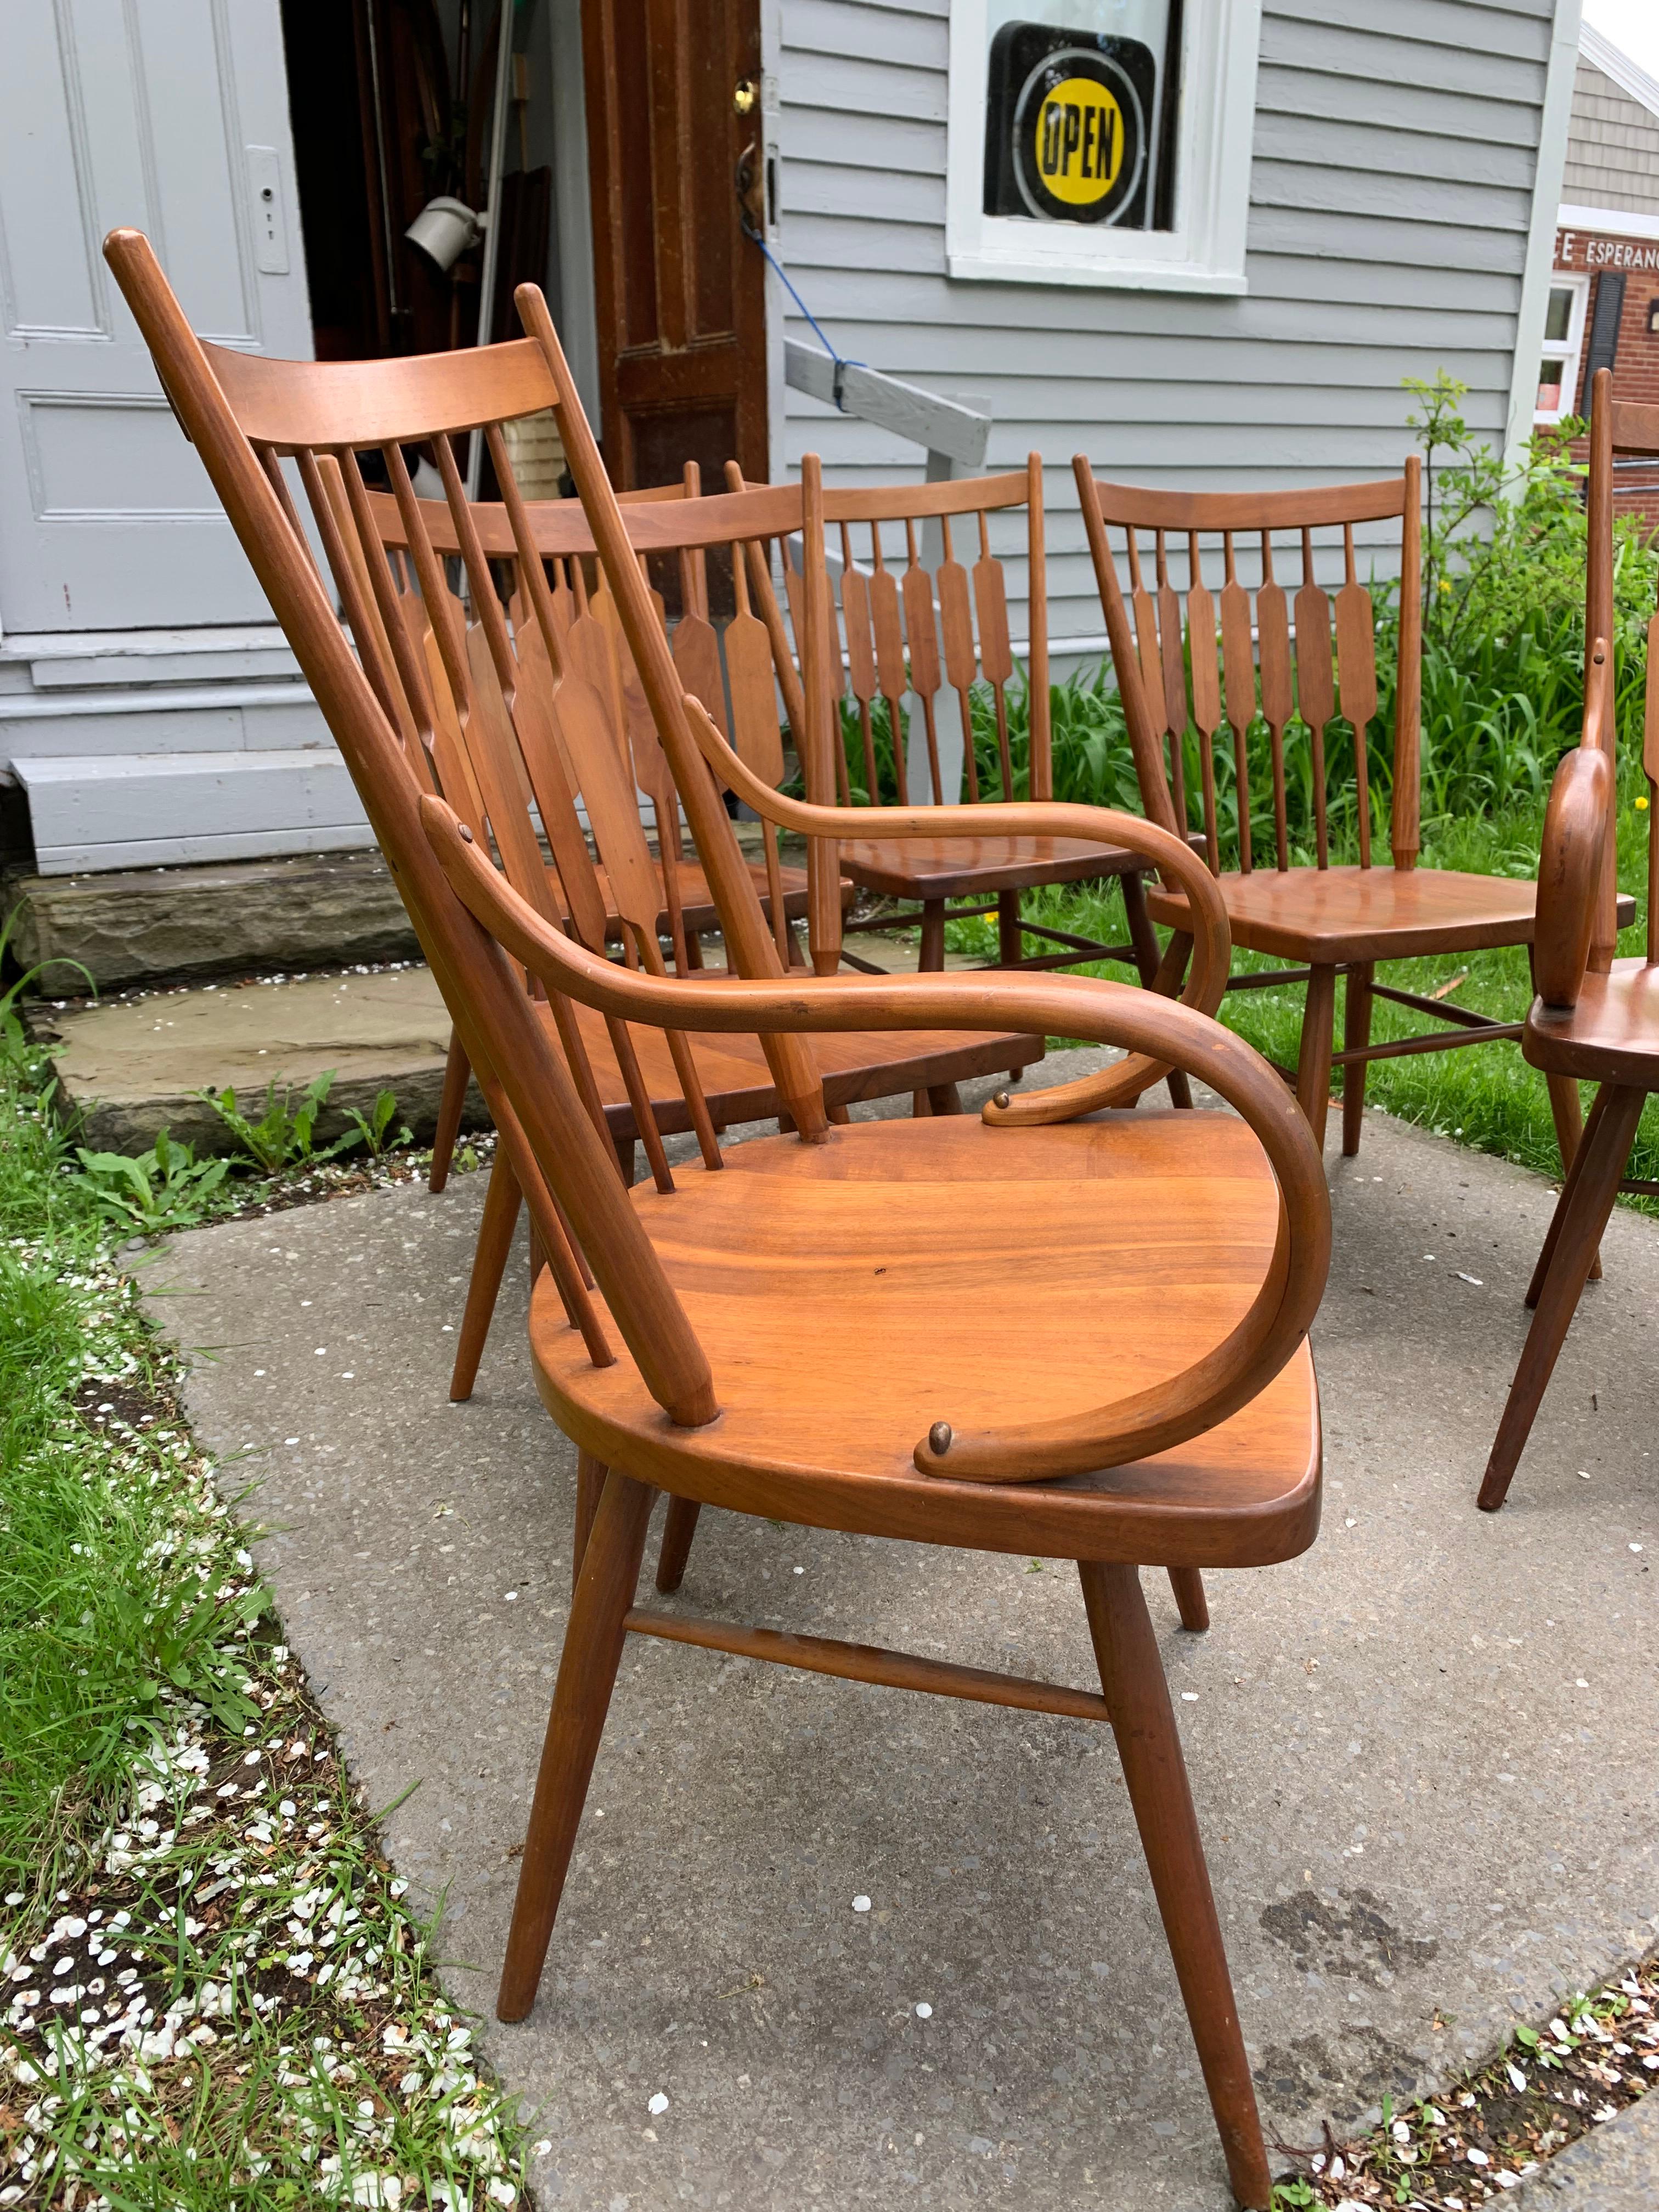 For sale are these outstanding Kipp Stewart dining chairs. The chairs are stunning and are very sleek and clean. Chairs are marked on bottom.